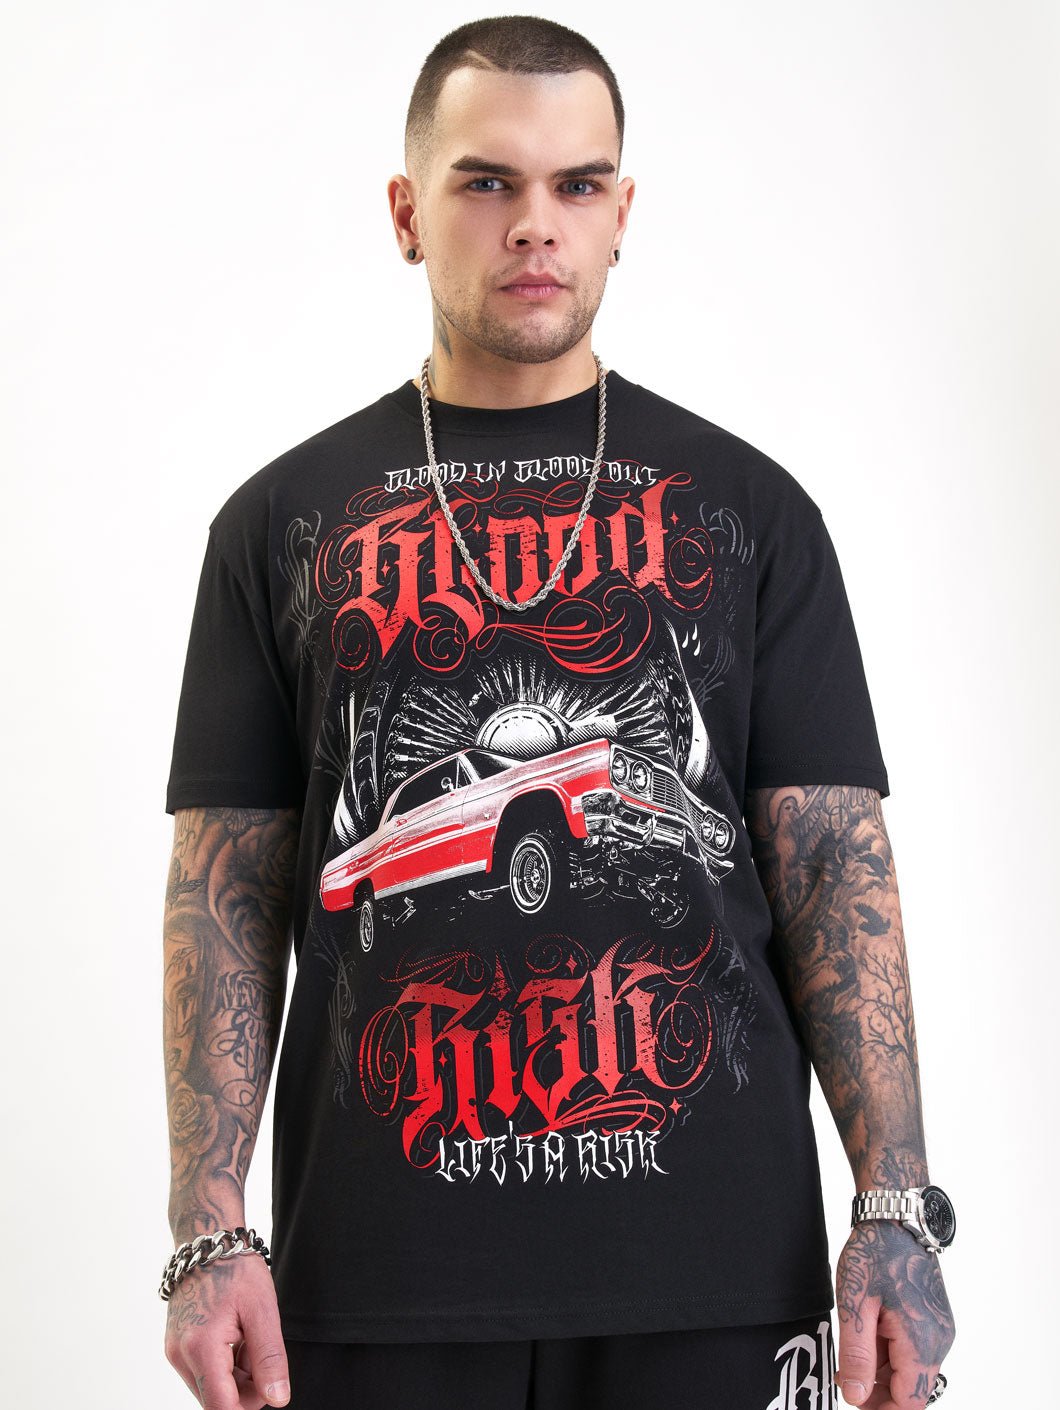 Blood In Blood Out Tavos T-Shirt - 5